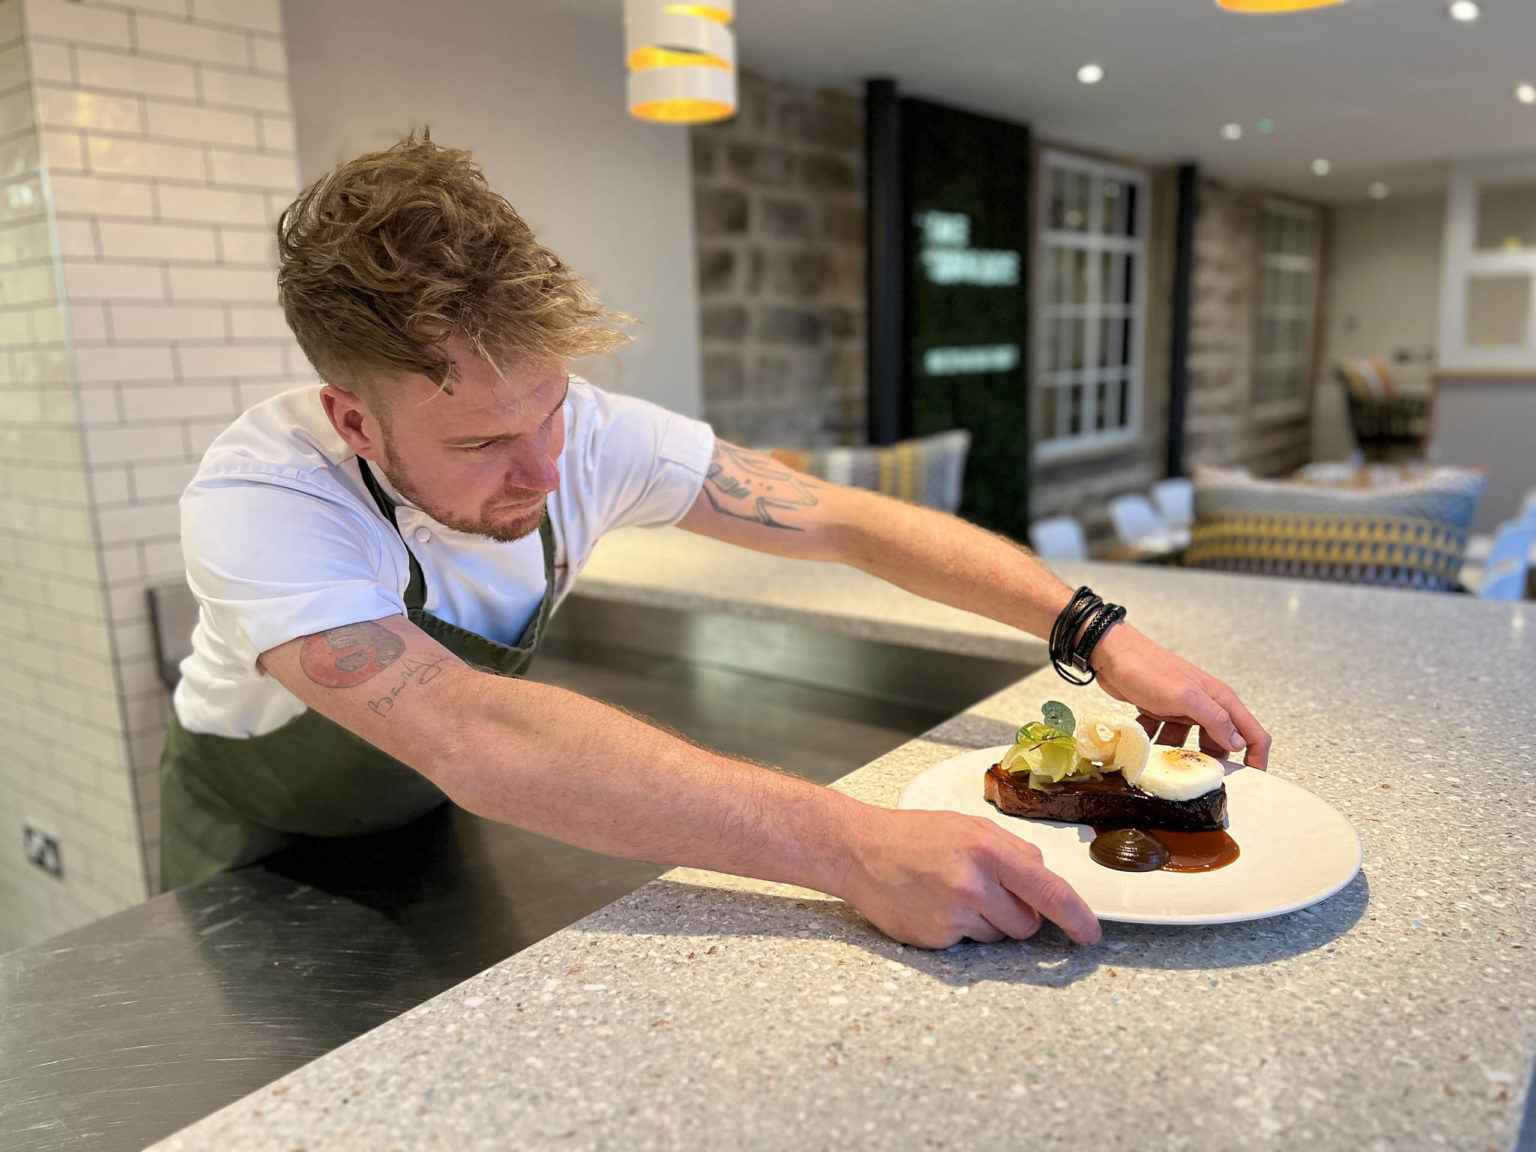 Chef Shaun Burke serving a plate of food at The Terrace Restaurant and Bar on the Swinton Estate in North Yorkshire